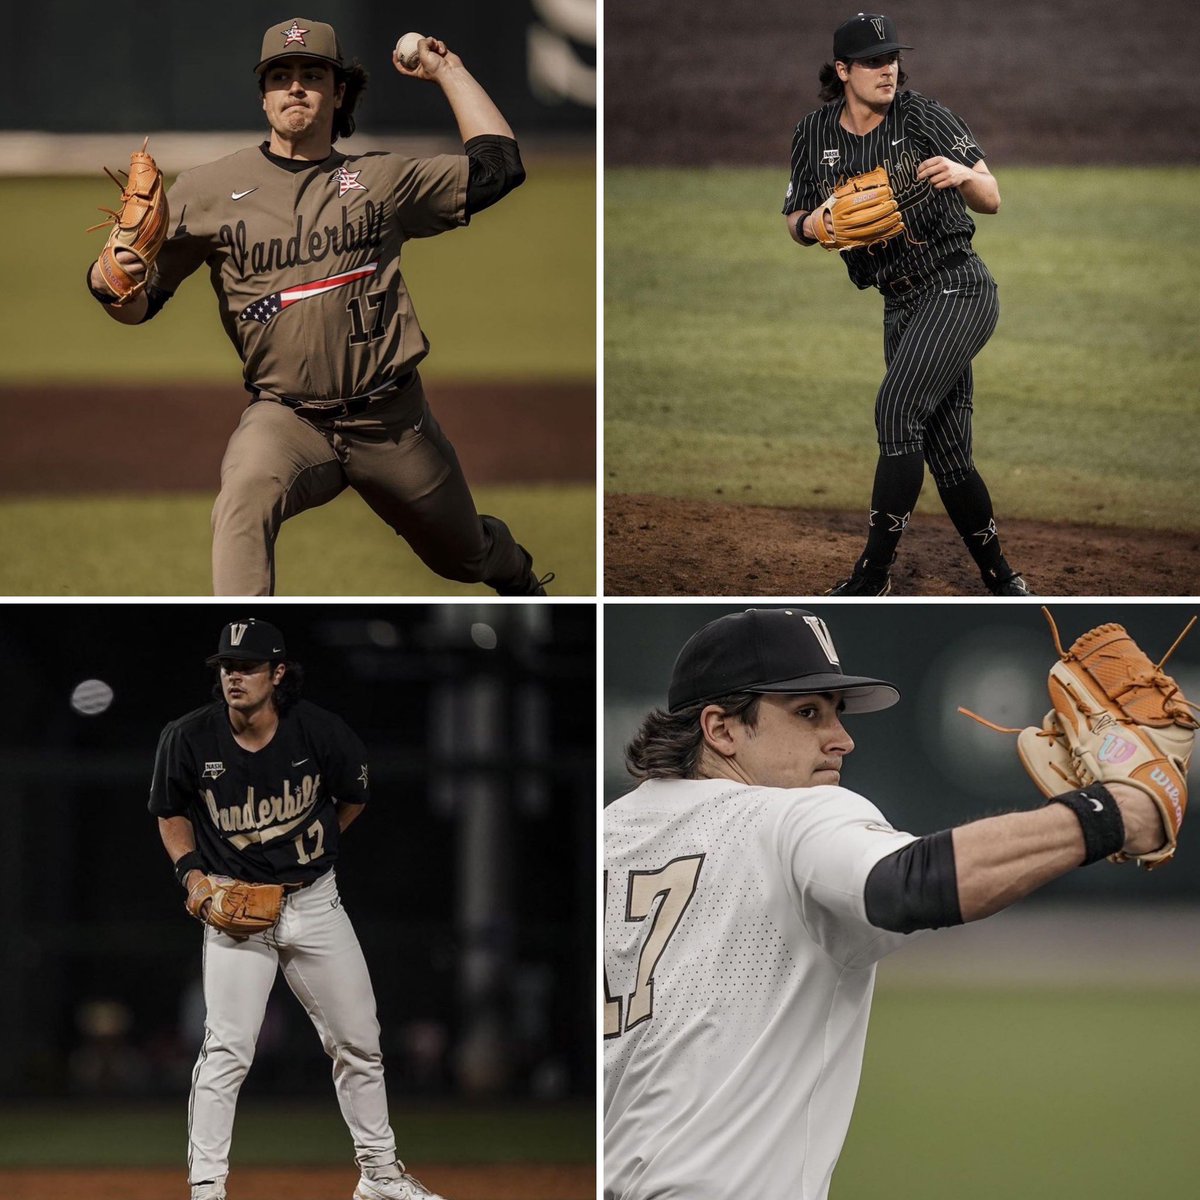 In Off The Bench Podcast
Our 300th guest is our guest ever from @VandyBoys and @ryan_ginth was phenomenal 🫡 #VandyBoys #GrowTheGame yall were right @CharlieCondon14 @drewbeam_ got to #GrowTheGame fun fact we are from same place 

spotify.link/iFPxXHNwTIb

youtu.be/KxWWcQZBv9k?si…